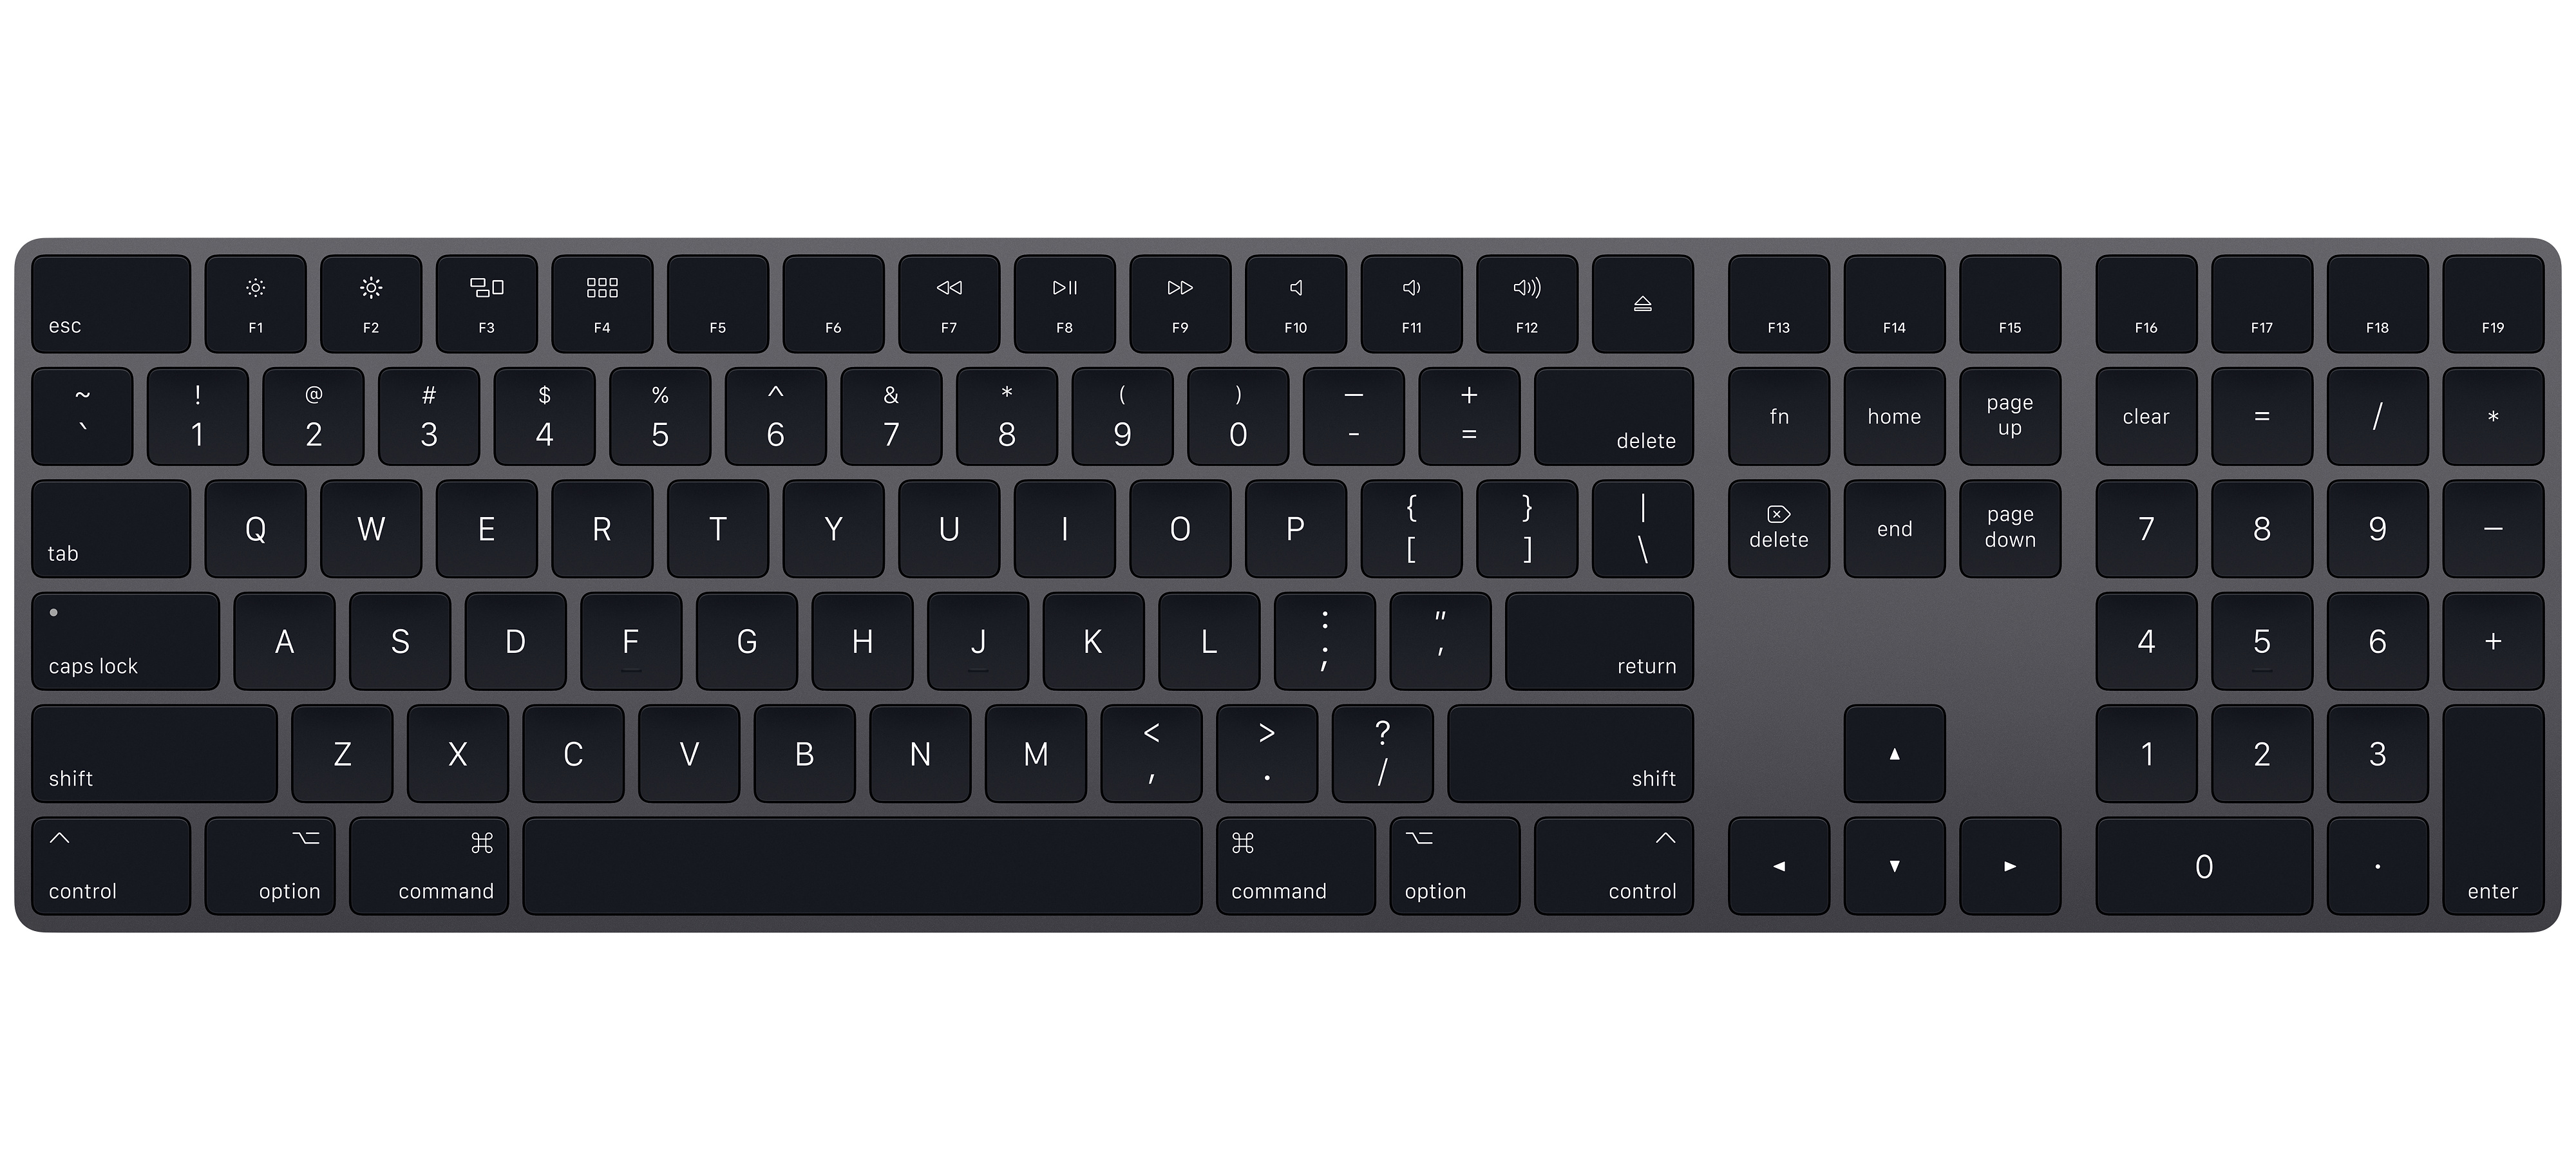 Buy Magic Keyboard with Numeric Keypad for Mac in Space Gray - Apple ...